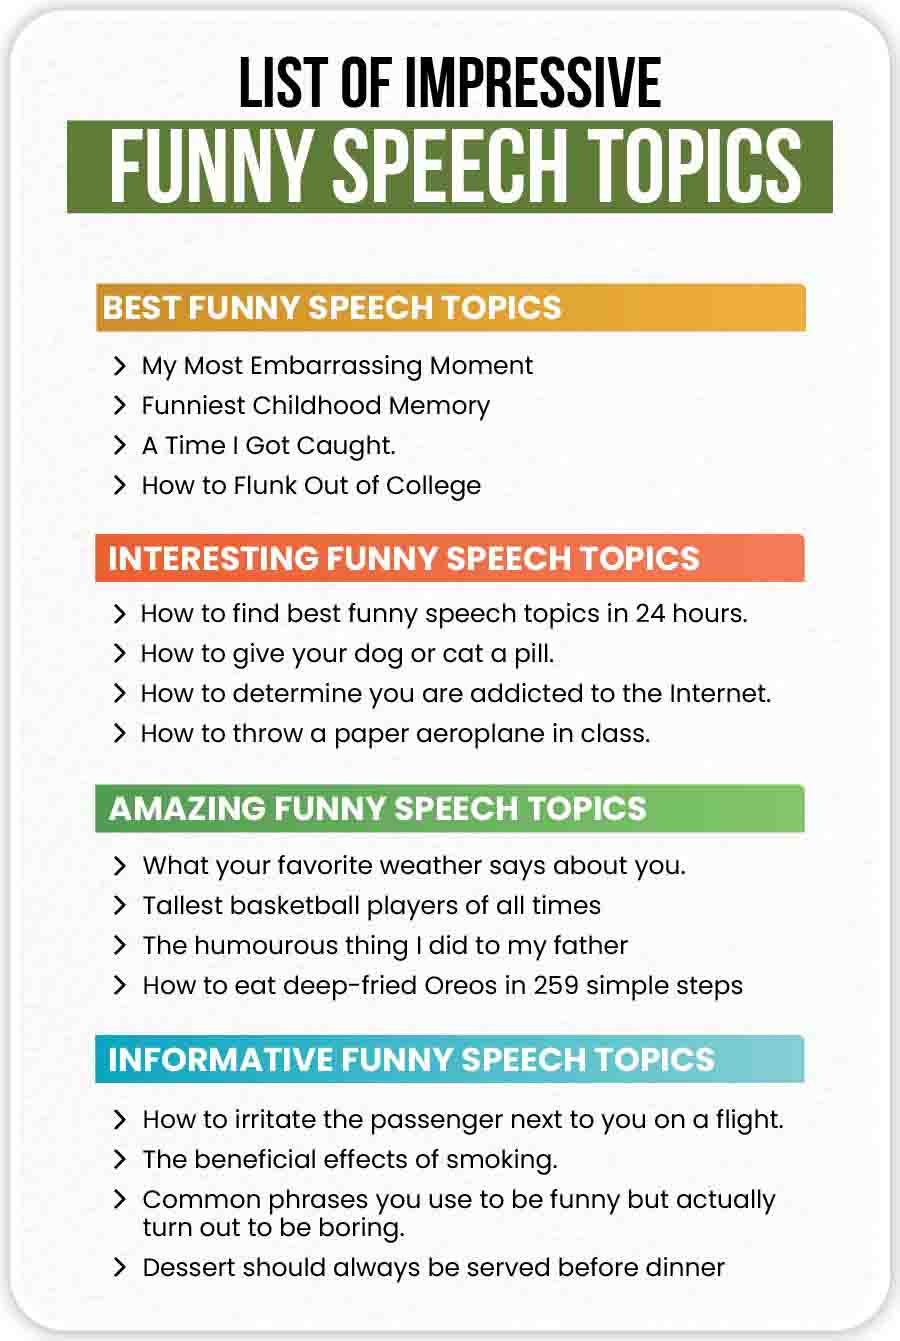 how to make a funny speech intro